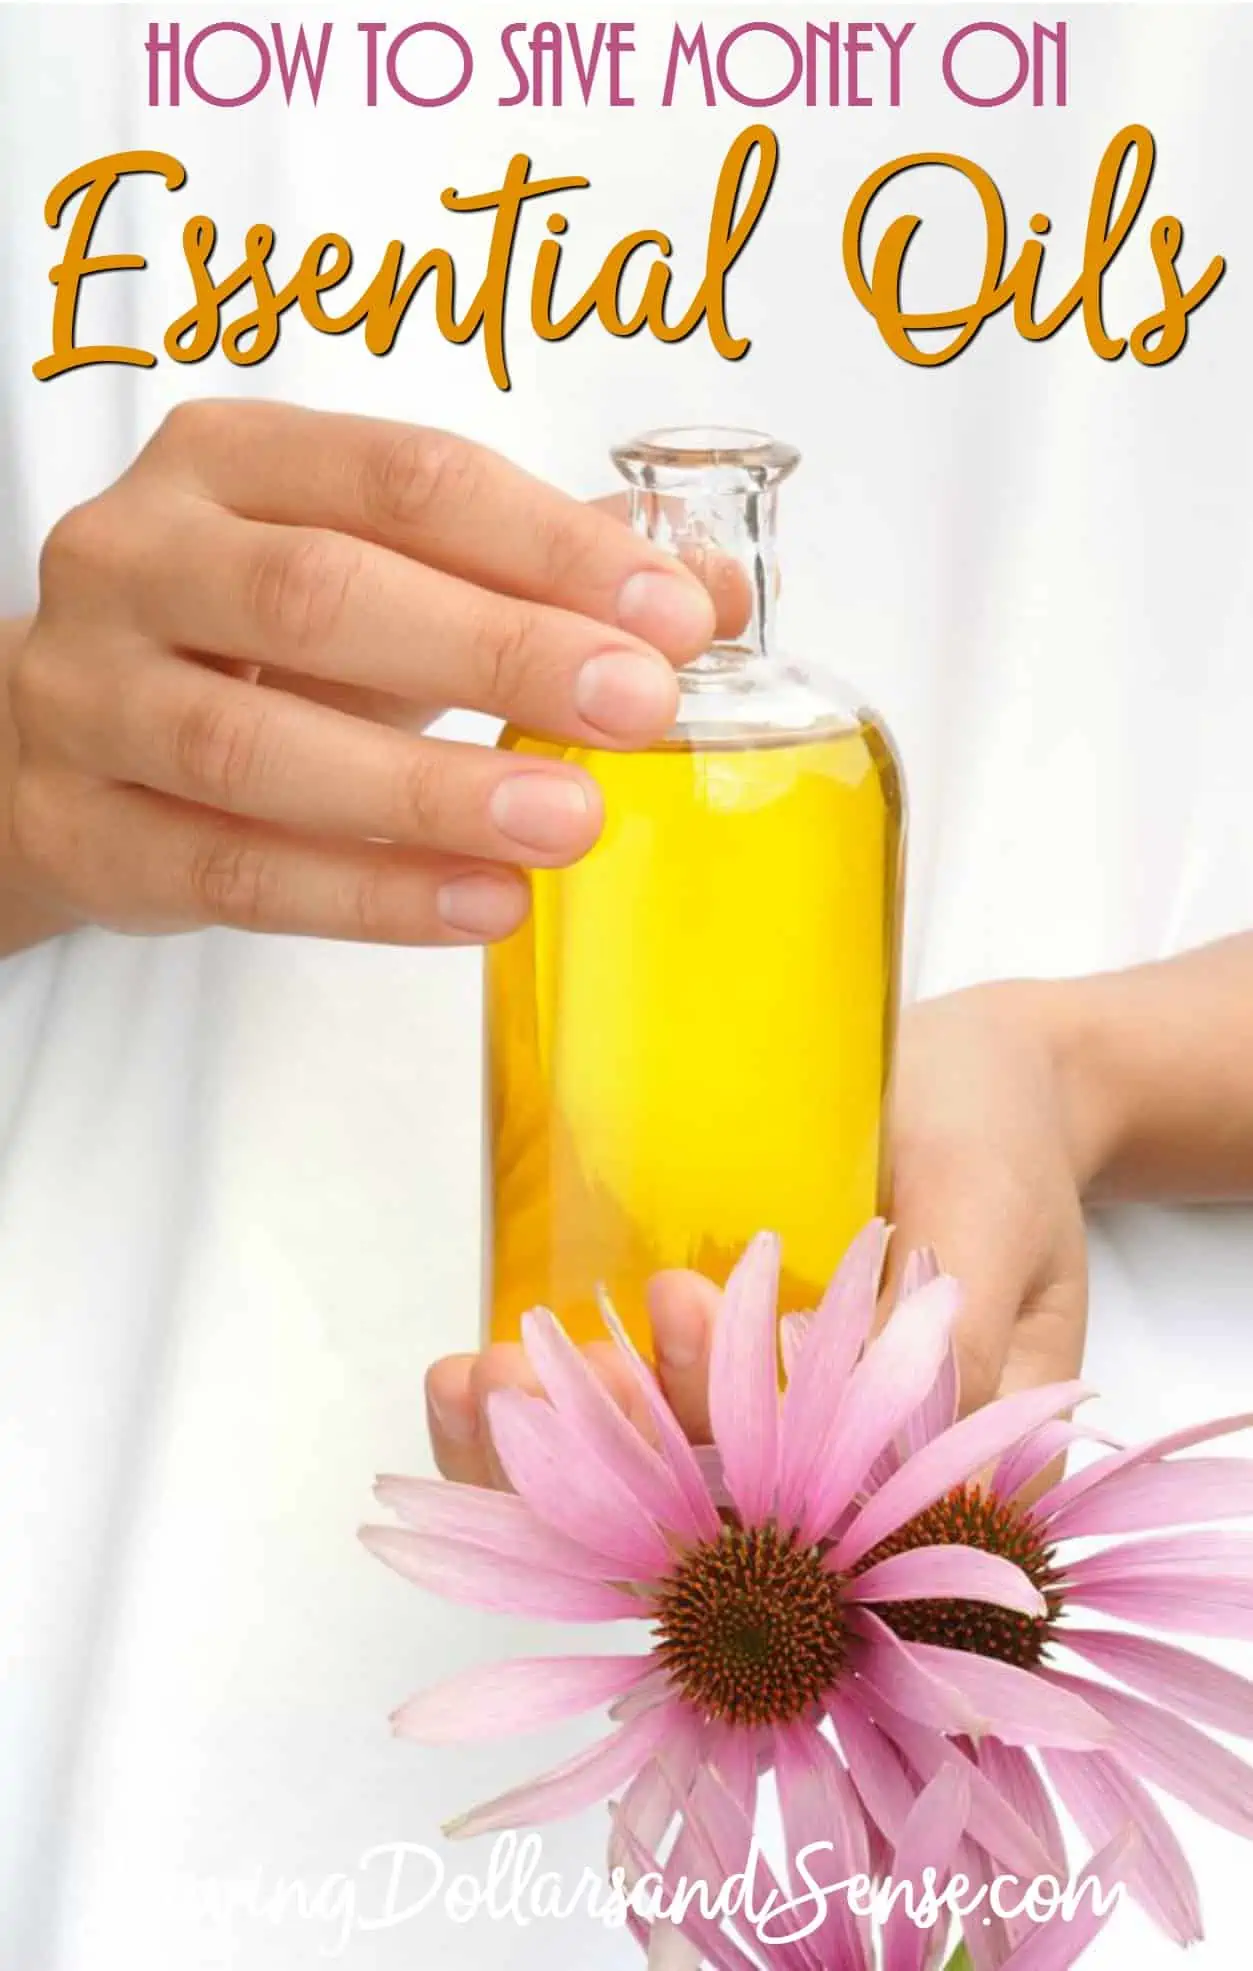 how to save money on essential oils